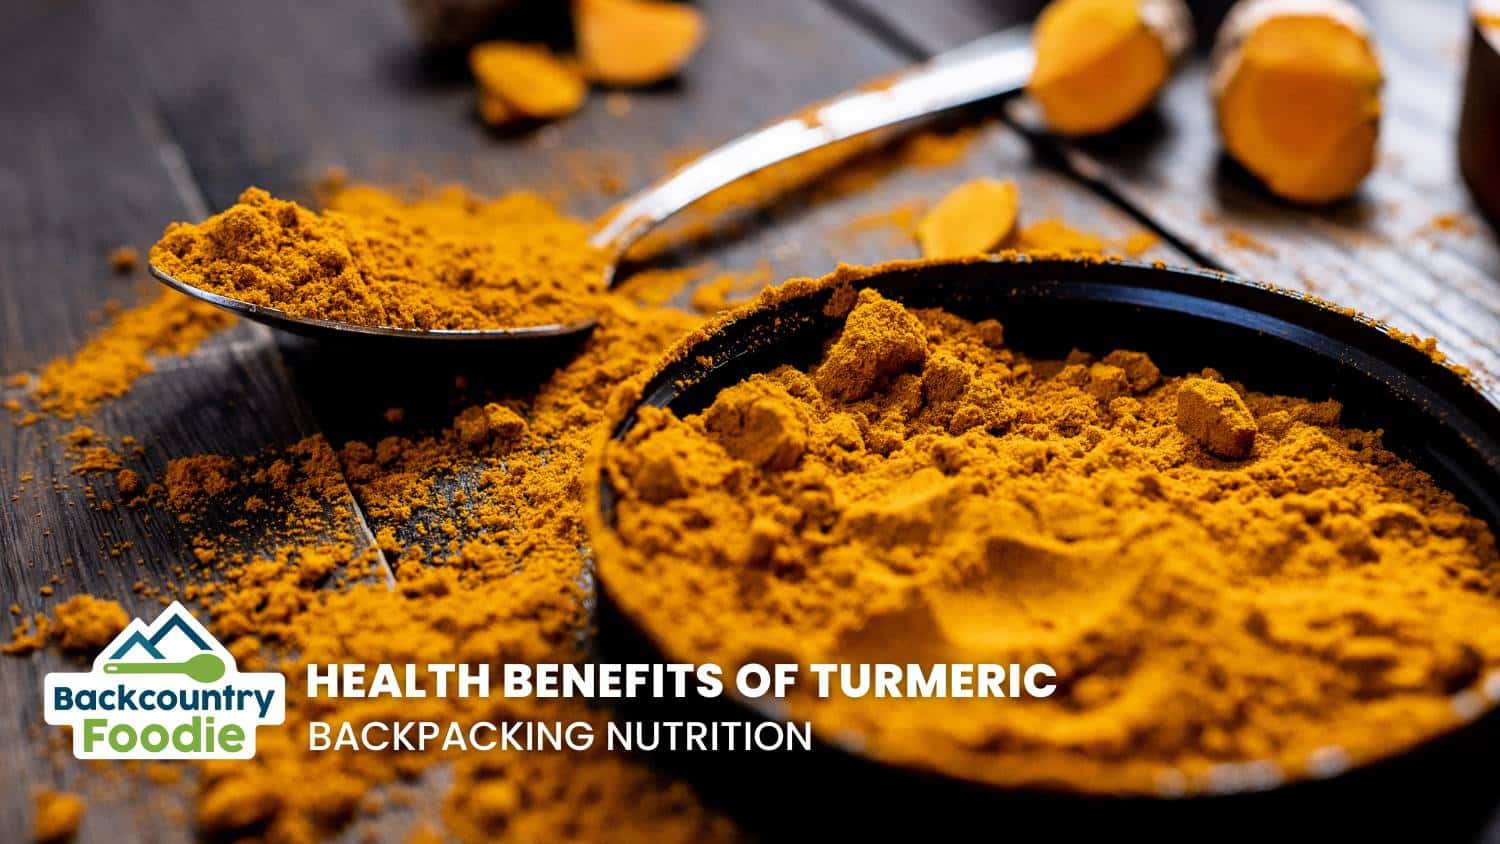 Backcountry Foodie blog Health Benefits of Turmeric Backpacking Nutrition thumbnail